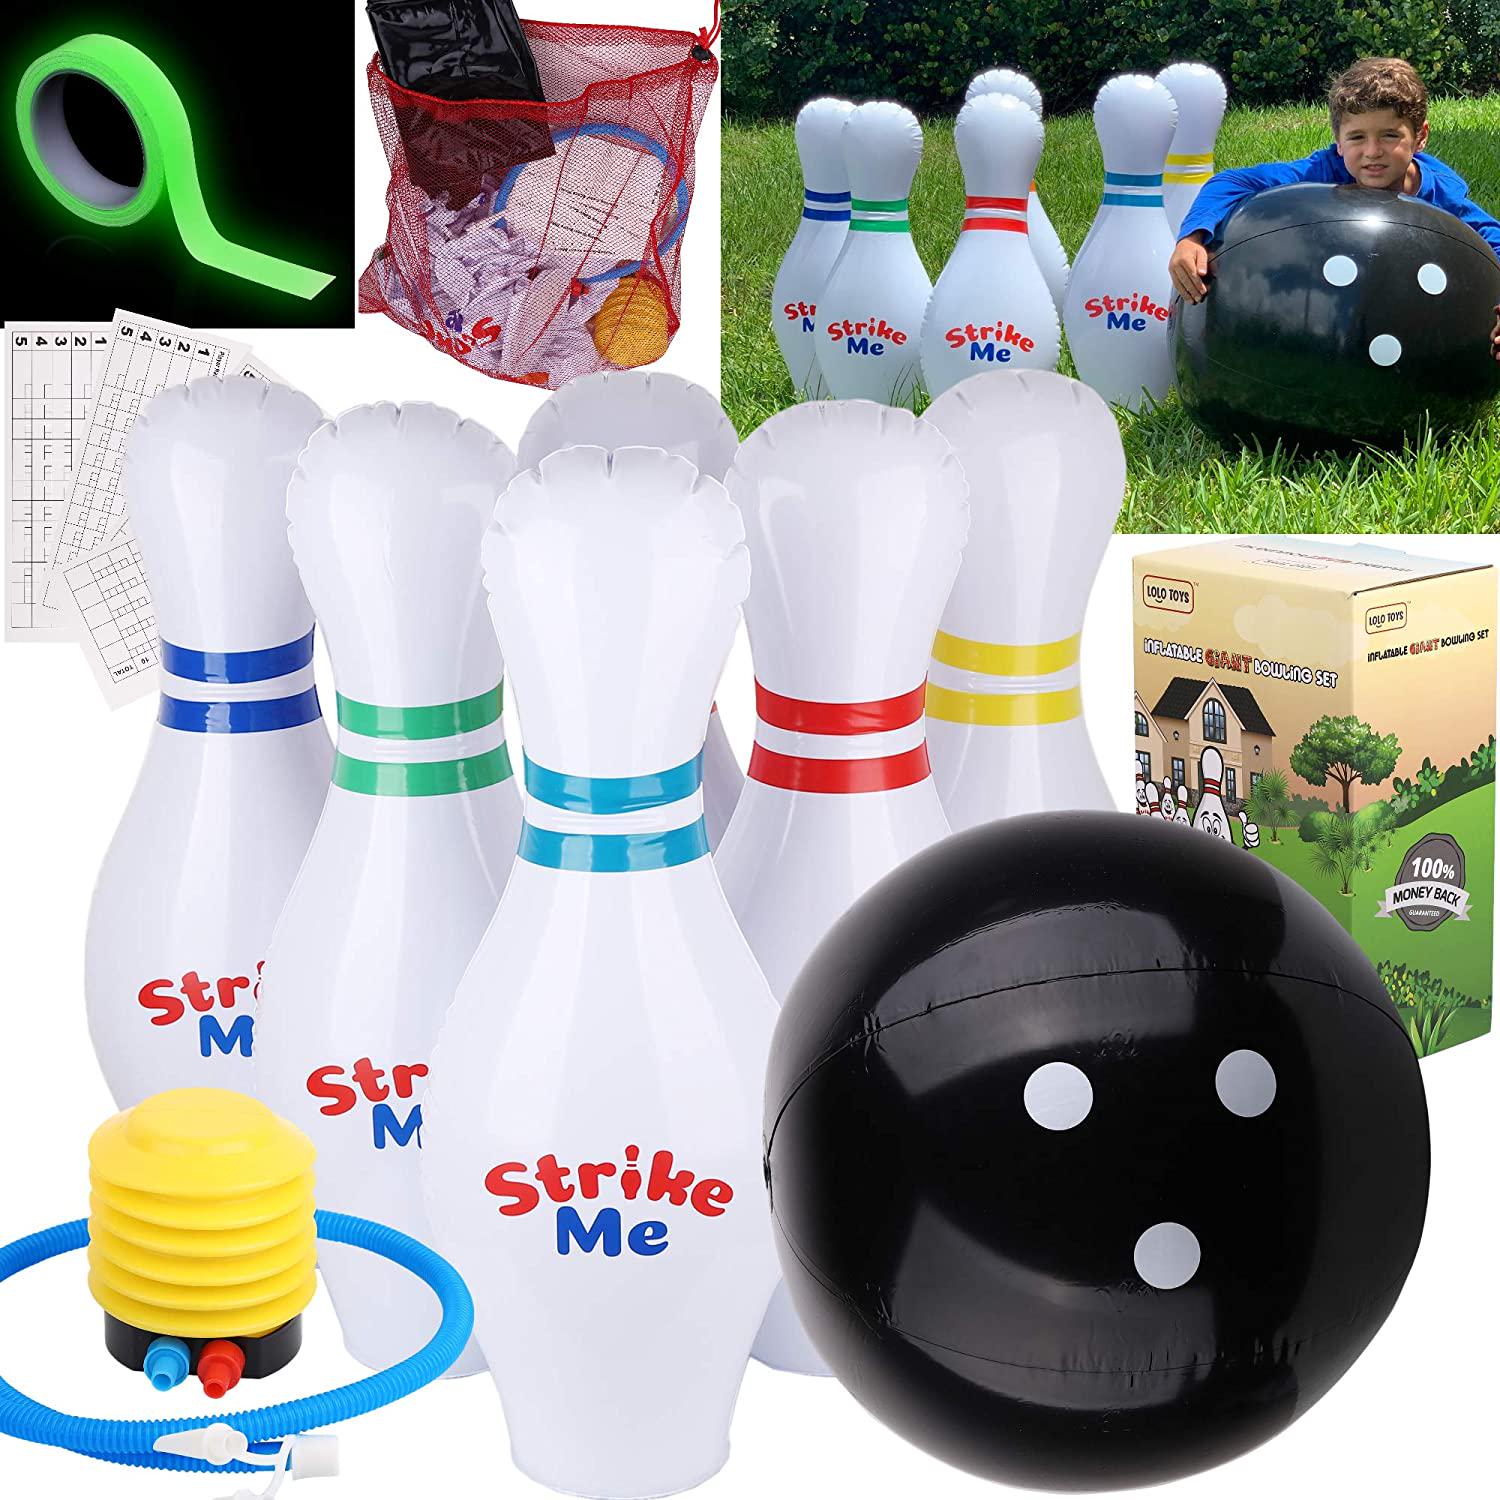 LOLO TOYS, LOLO TOYS Inflatable Bowling Set, 6 Huge Life Size Large Jumbo 24 Inch Pins and Extra Big 24 Inch Ball, 1 Pump, Scorer Board, 1 Mesh Bag, Vinyl Patch, Glow Tape